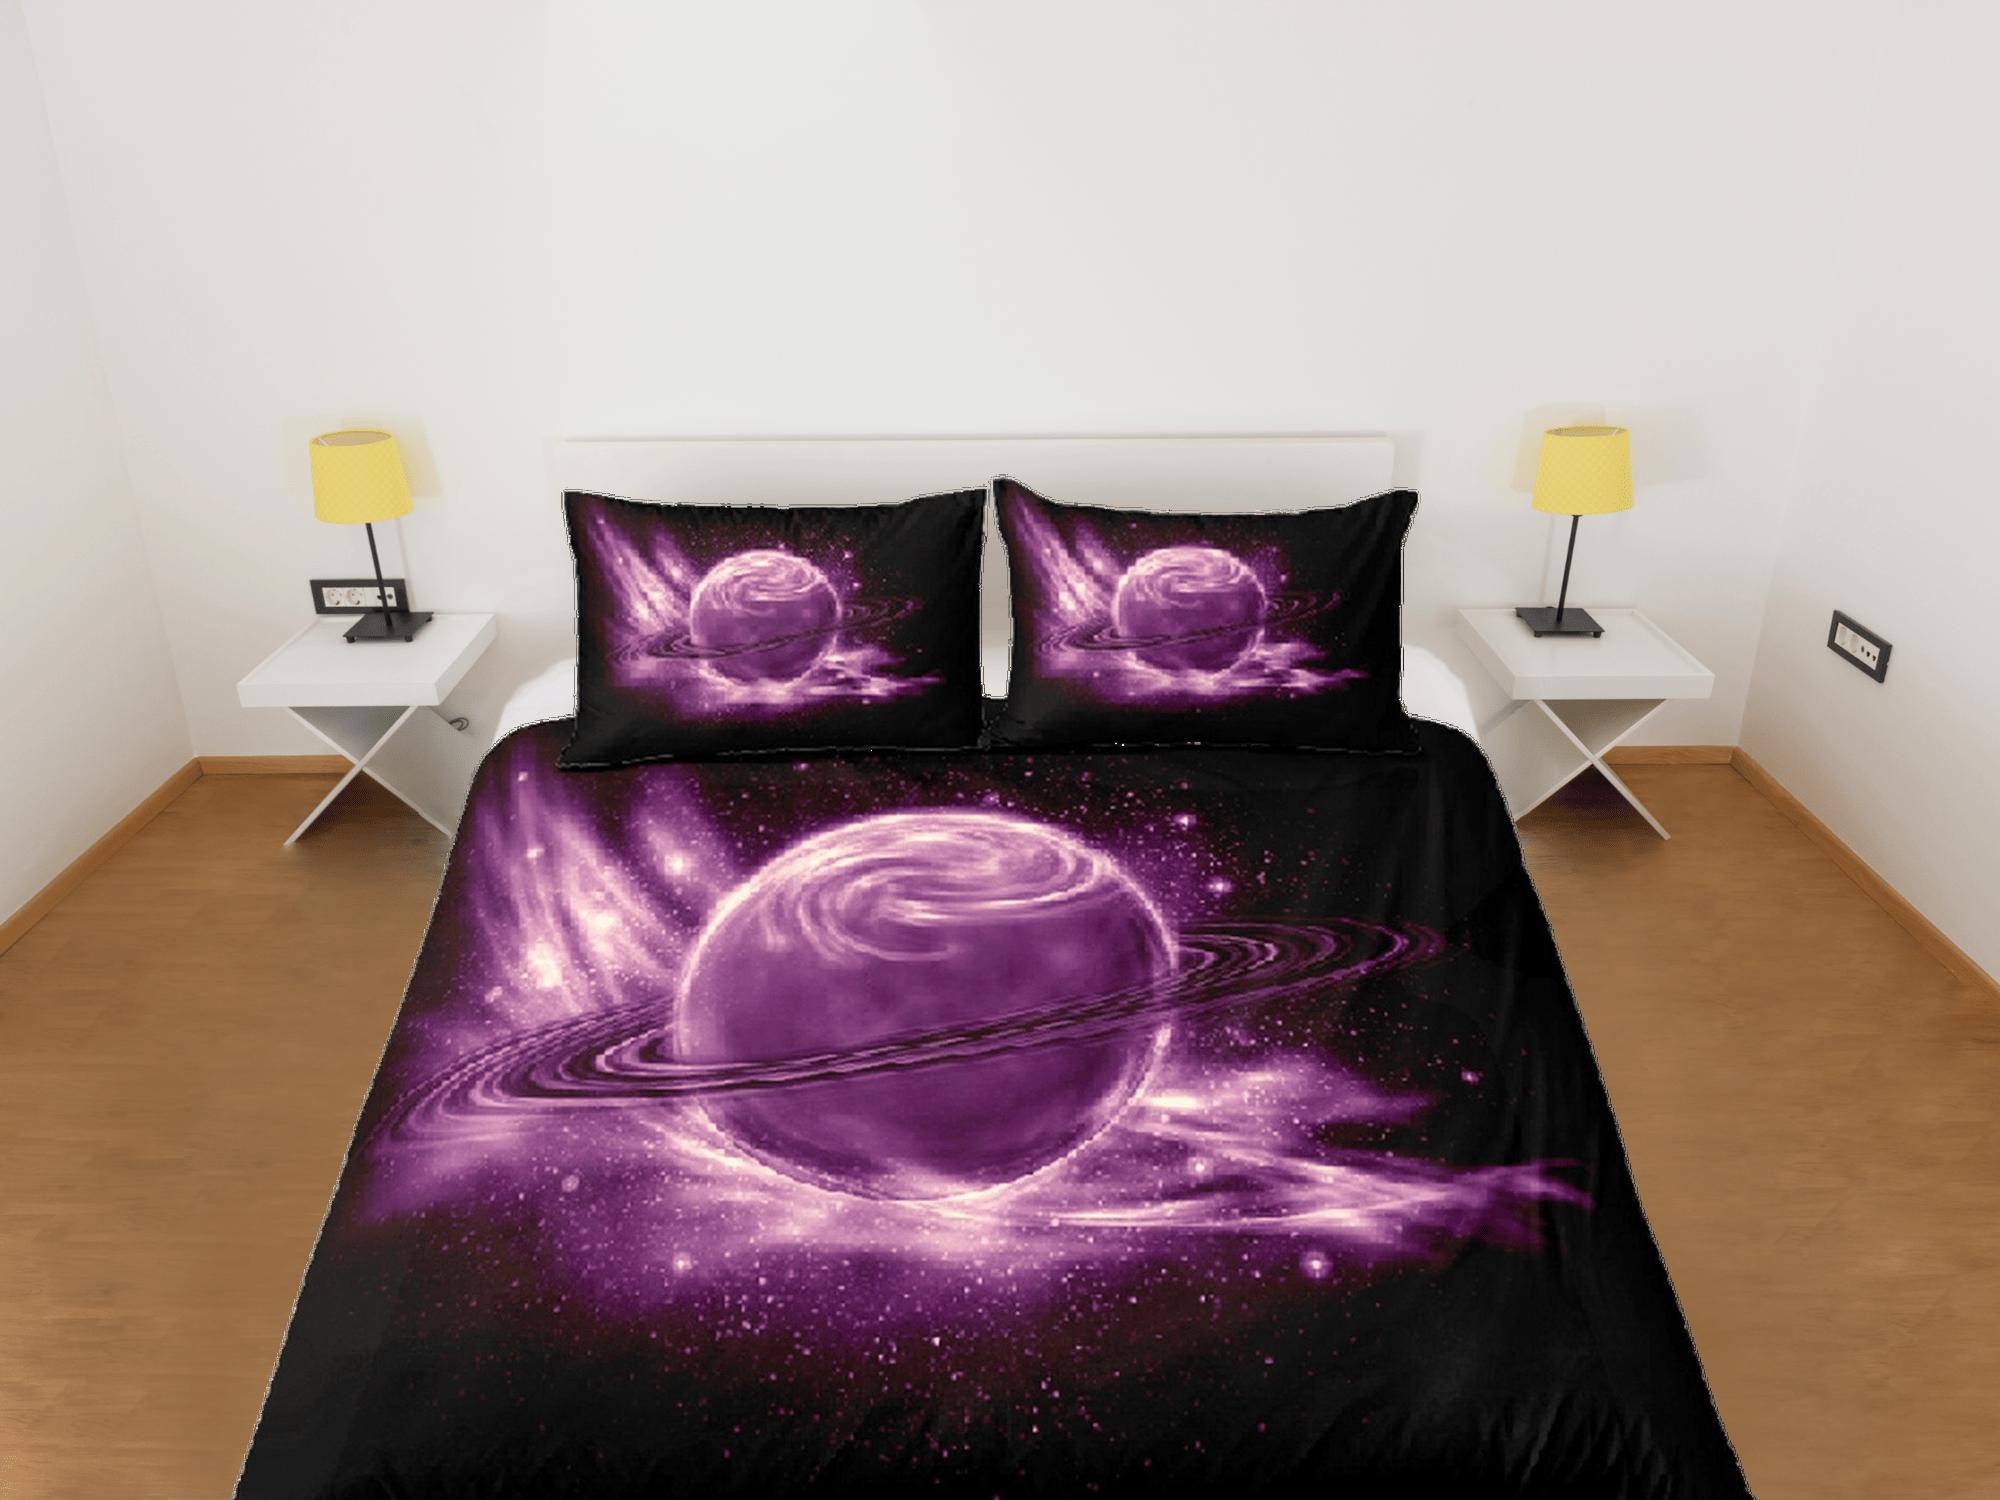 daintyduvet Purple planet duvet cover set, Saturn galaxy bedding, outer space bedding set full, duvet cover king, queen, dorm bedding, toddler bedding